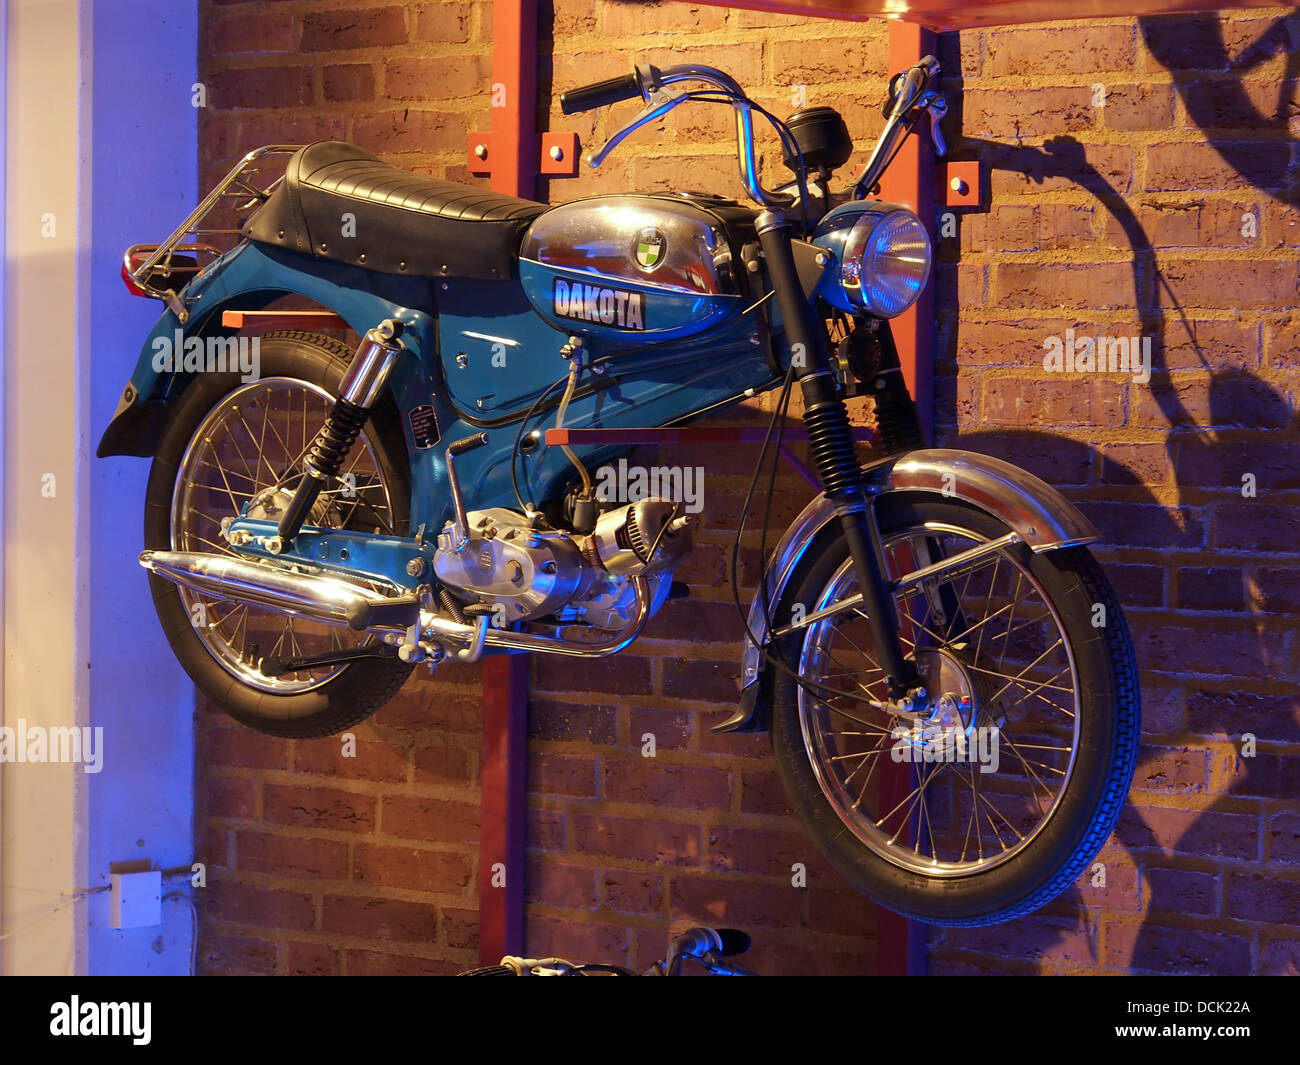 Puch Dakota At The Teknikens Och Sj C3 B6fartens Hus High Resolution Stock  Photography and Images - Alamy